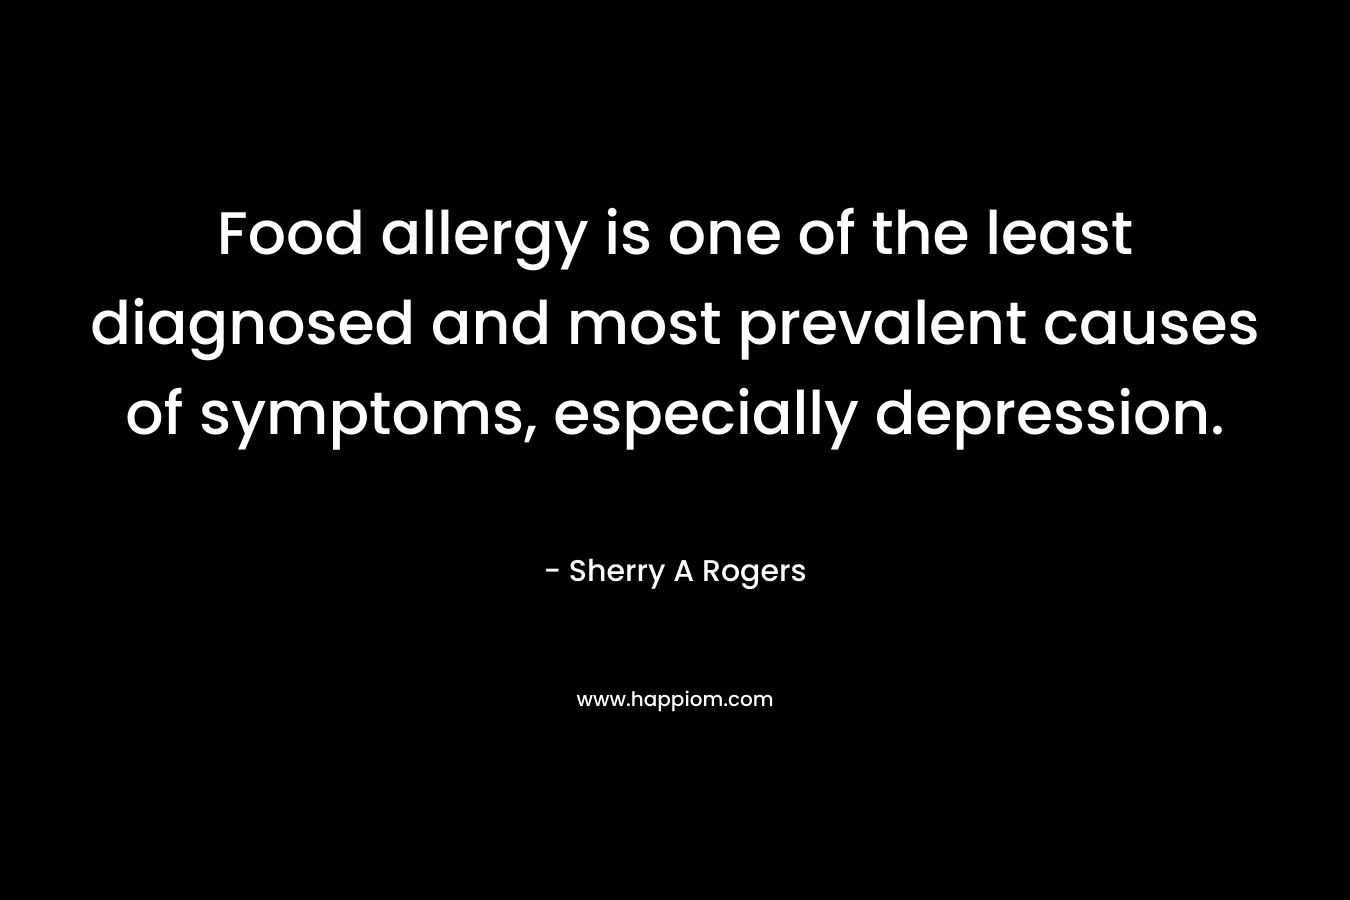 Food allergy is one of the least diagnosed and most prevalent causes of symptoms, especially depression.